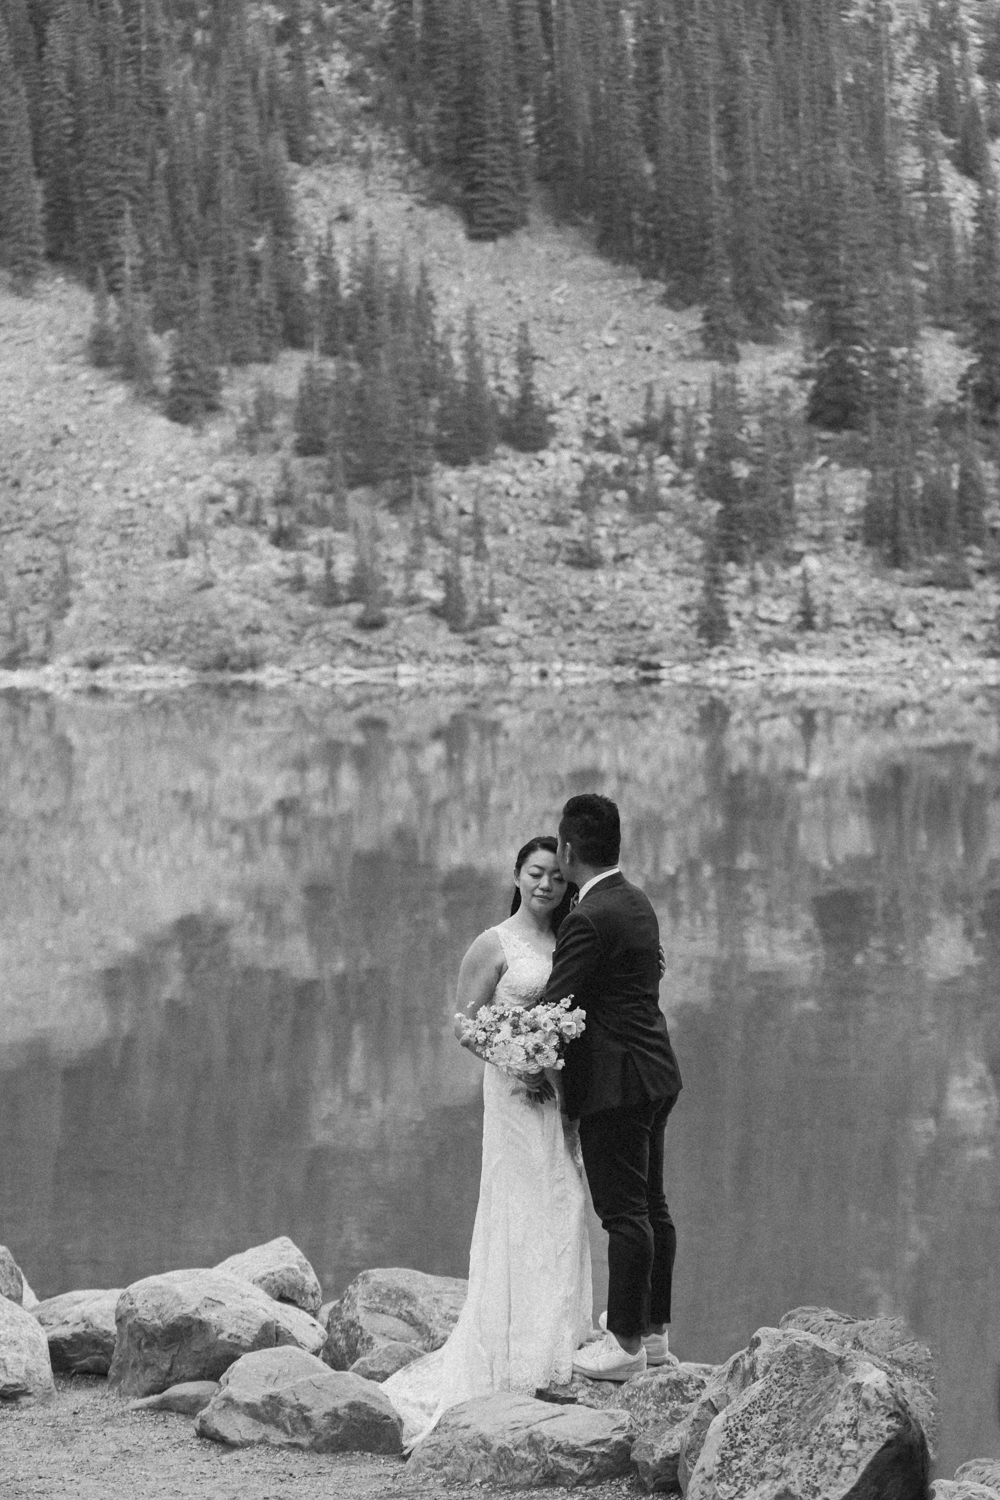 Elopement in Banff National Park couples portraits at sunset